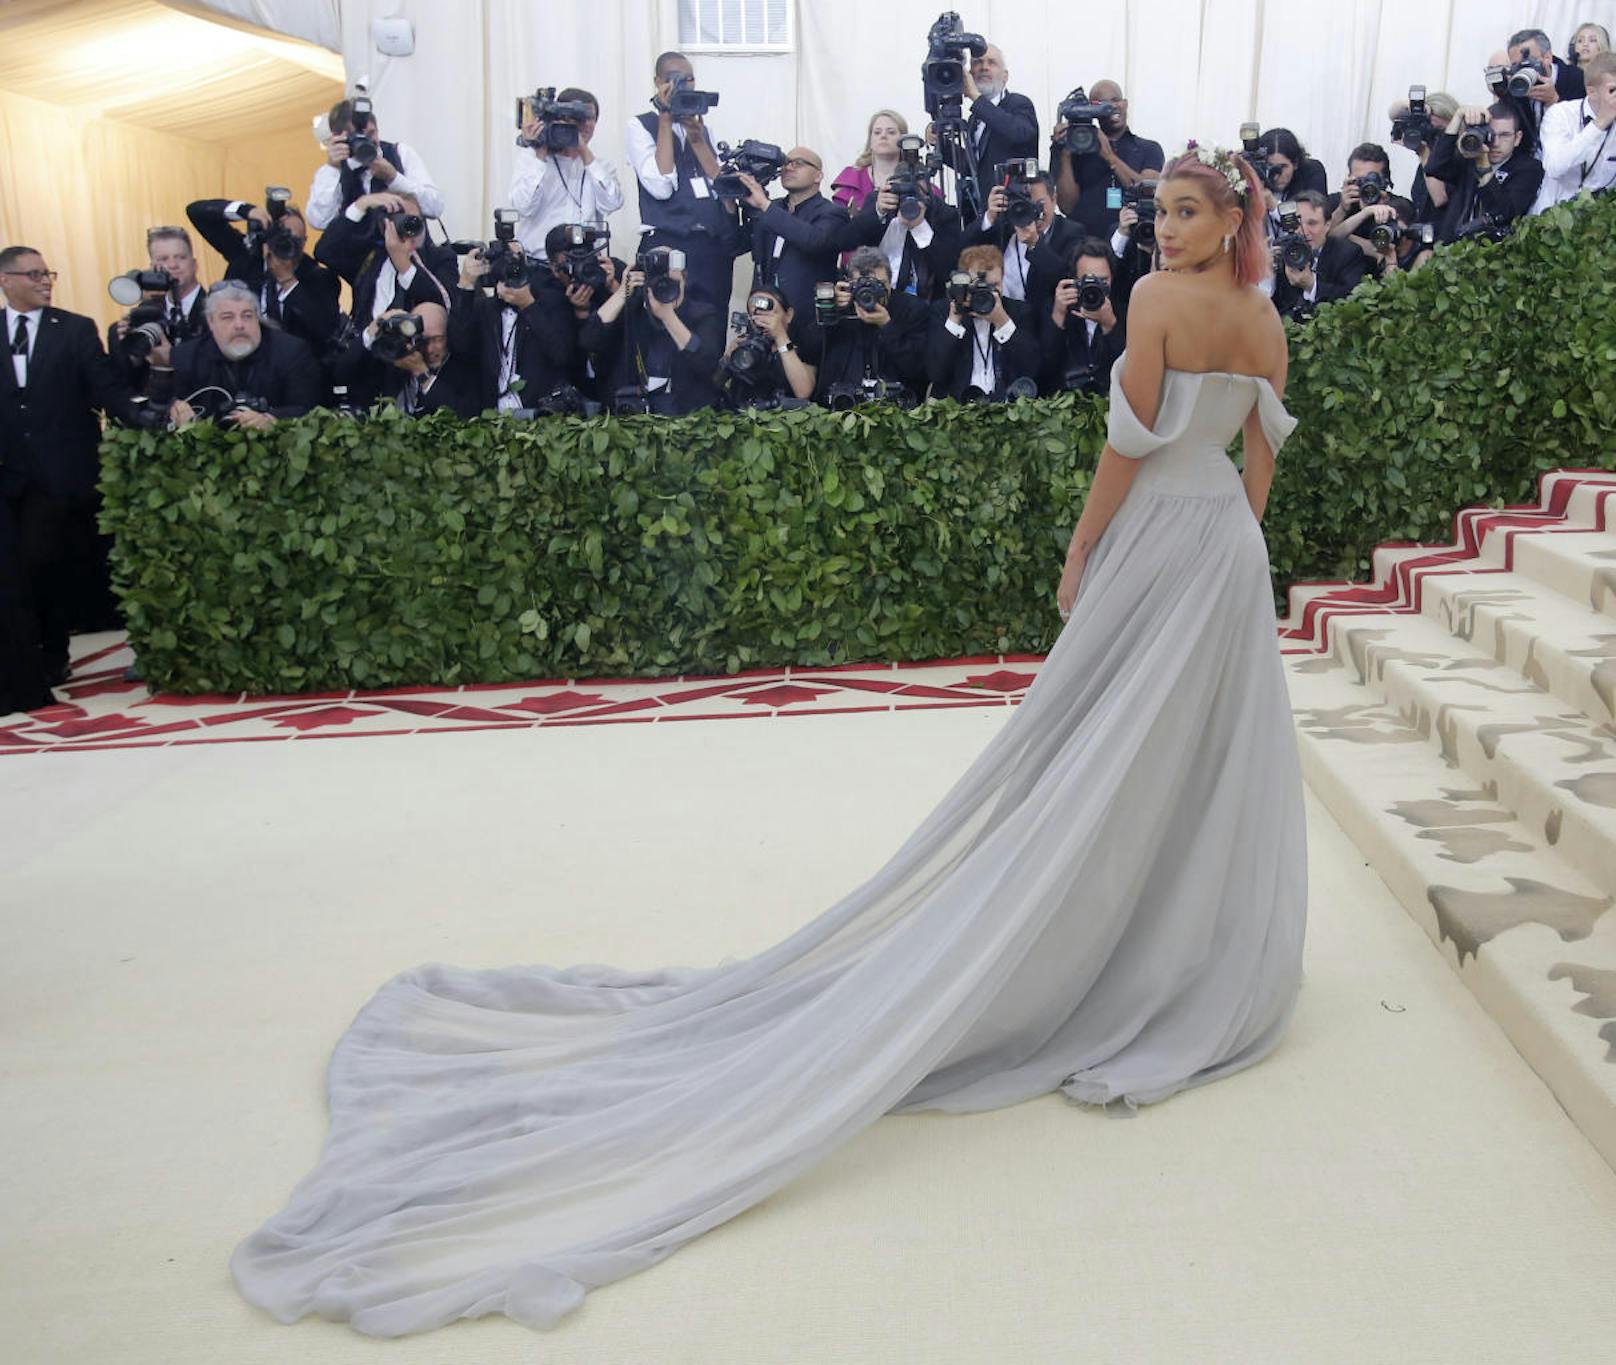 Hailey Baldwin arrives at the Metropolitan Museum of Art Costume Institute Gala (Met Gala) to celebrate the opening of "Heavenly Bodies: Fashion and the Catholic Imagination" in the Manhattan borough of New York, U.S., May 7, 2018. REUTERS/Eduardo Munoz - HP1EE571U8O45